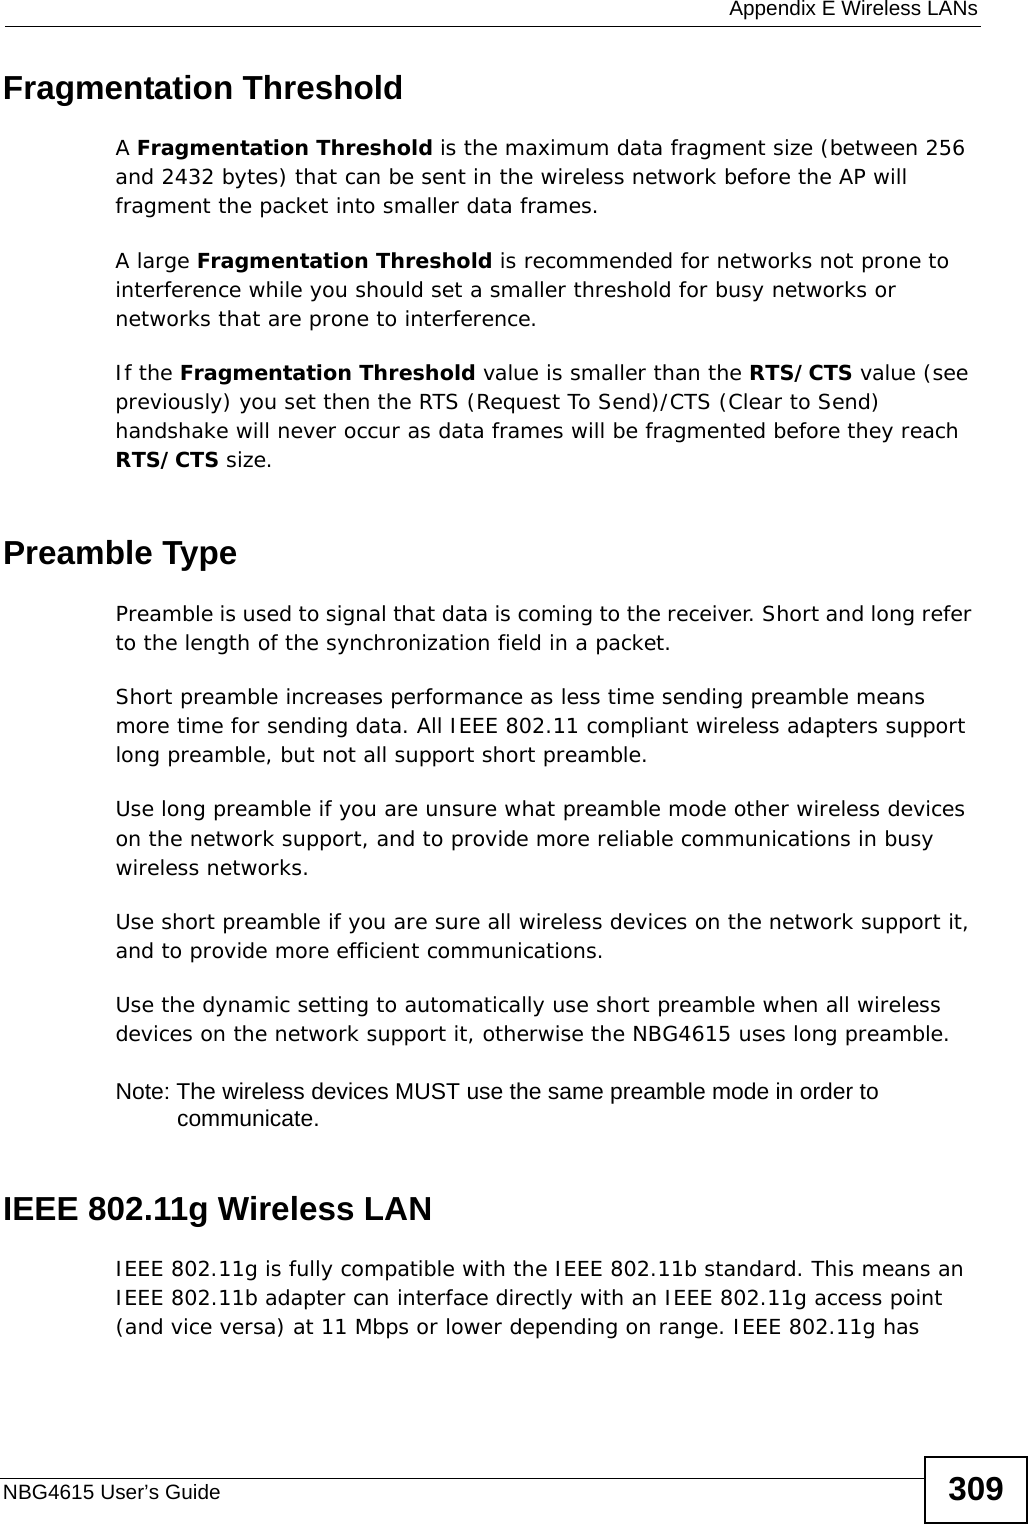  Appendix E Wireless LANsNBG4615 User’s Guide 309Fragmentation ThresholdA Fragmentation Threshold is the maximum data fragment size (between 256 and 2432 bytes) that can be sent in the wireless network before the AP will fragment the packet into smaller data frames.A large Fragmentation Threshold is recommended for networks not prone to interference while you should set a smaller threshold for busy networks or networks that are prone to interference.If the Fragmentation Threshold value is smaller than the RTS/CTS value (see previously) you set then the RTS (Request To Send)/CTS (Clear to Send) handshake will never occur as data frames will be fragmented before they reach RTS/CTS size.Preamble TypePreamble is used to signal that data is coming to the receiver. Short and long refer to the length of the synchronization field in a packet.Short preamble increases performance as less time sending preamble means more time for sending data. All IEEE 802.11 compliant wireless adapters support long preamble, but not all support short preamble. Use long preamble if you are unsure what preamble mode other wireless devices on the network support, and to provide more reliable communications in busy wireless networks. Use short preamble if you are sure all wireless devices on the network support it, and to provide more efficient communications.Use the dynamic setting to automatically use short preamble when all wireless devices on the network support it, otherwise the NBG4615 uses long preamble.Note: The wireless devices MUST use the same preamble mode in order to communicate.IEEE 802.11g Wireless LANIEEE 802.11g is fully compatible with the IEEE 802.11b standard. This means an IEEE 802.11b adapter can interface directly with an IEEE 802.11g access point (and vice versa) at 11 Mbps or lower depending on range. IEEE 802.11g has 